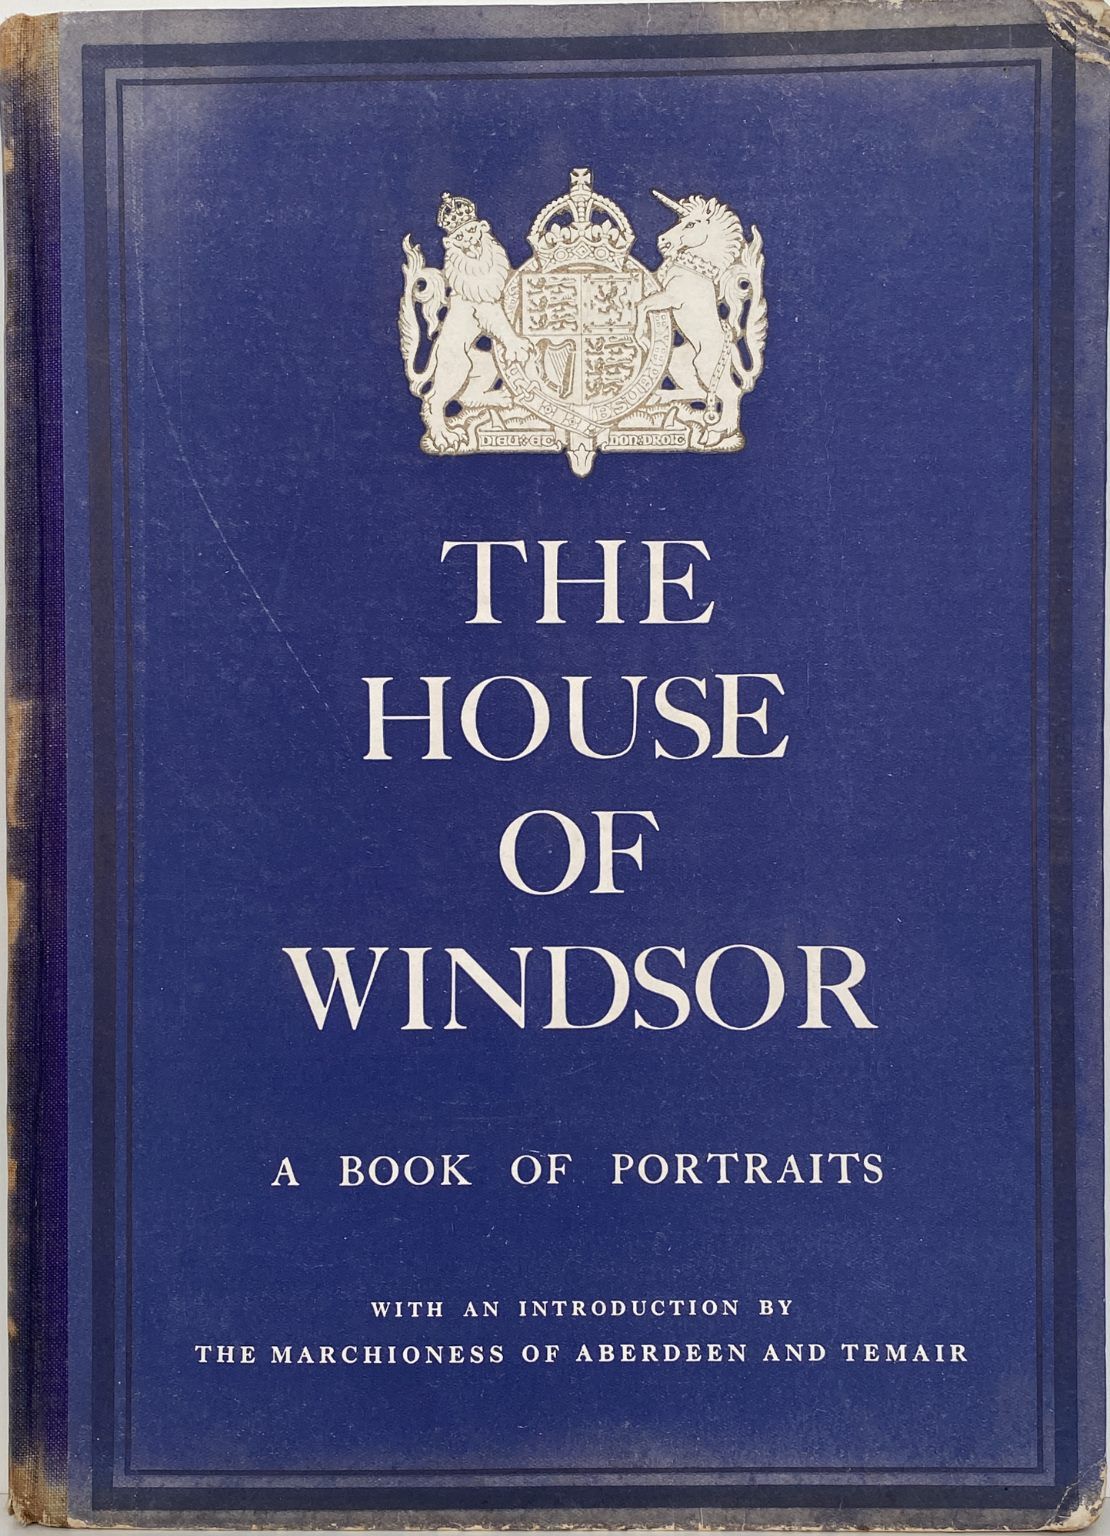 THE HOUSE OF WINDSOR: A Book of Portraits